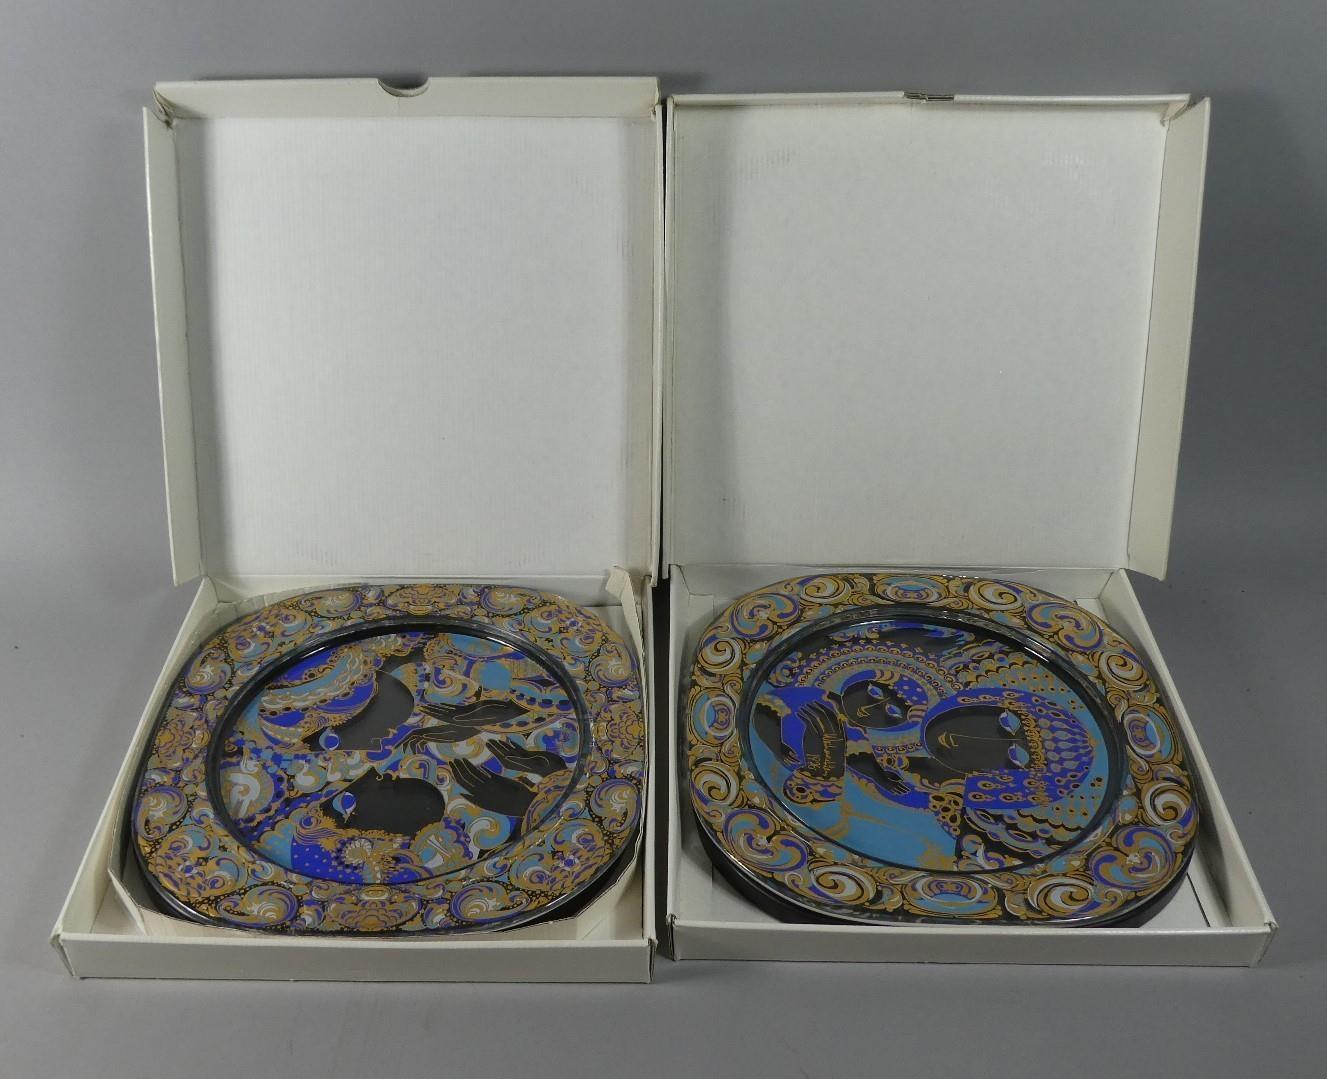 Two German Rosenthal Limited Edition Glass Plates 'Weihnachtsteller' (Christmas) Designed by Bjorn - Image 2 of 3